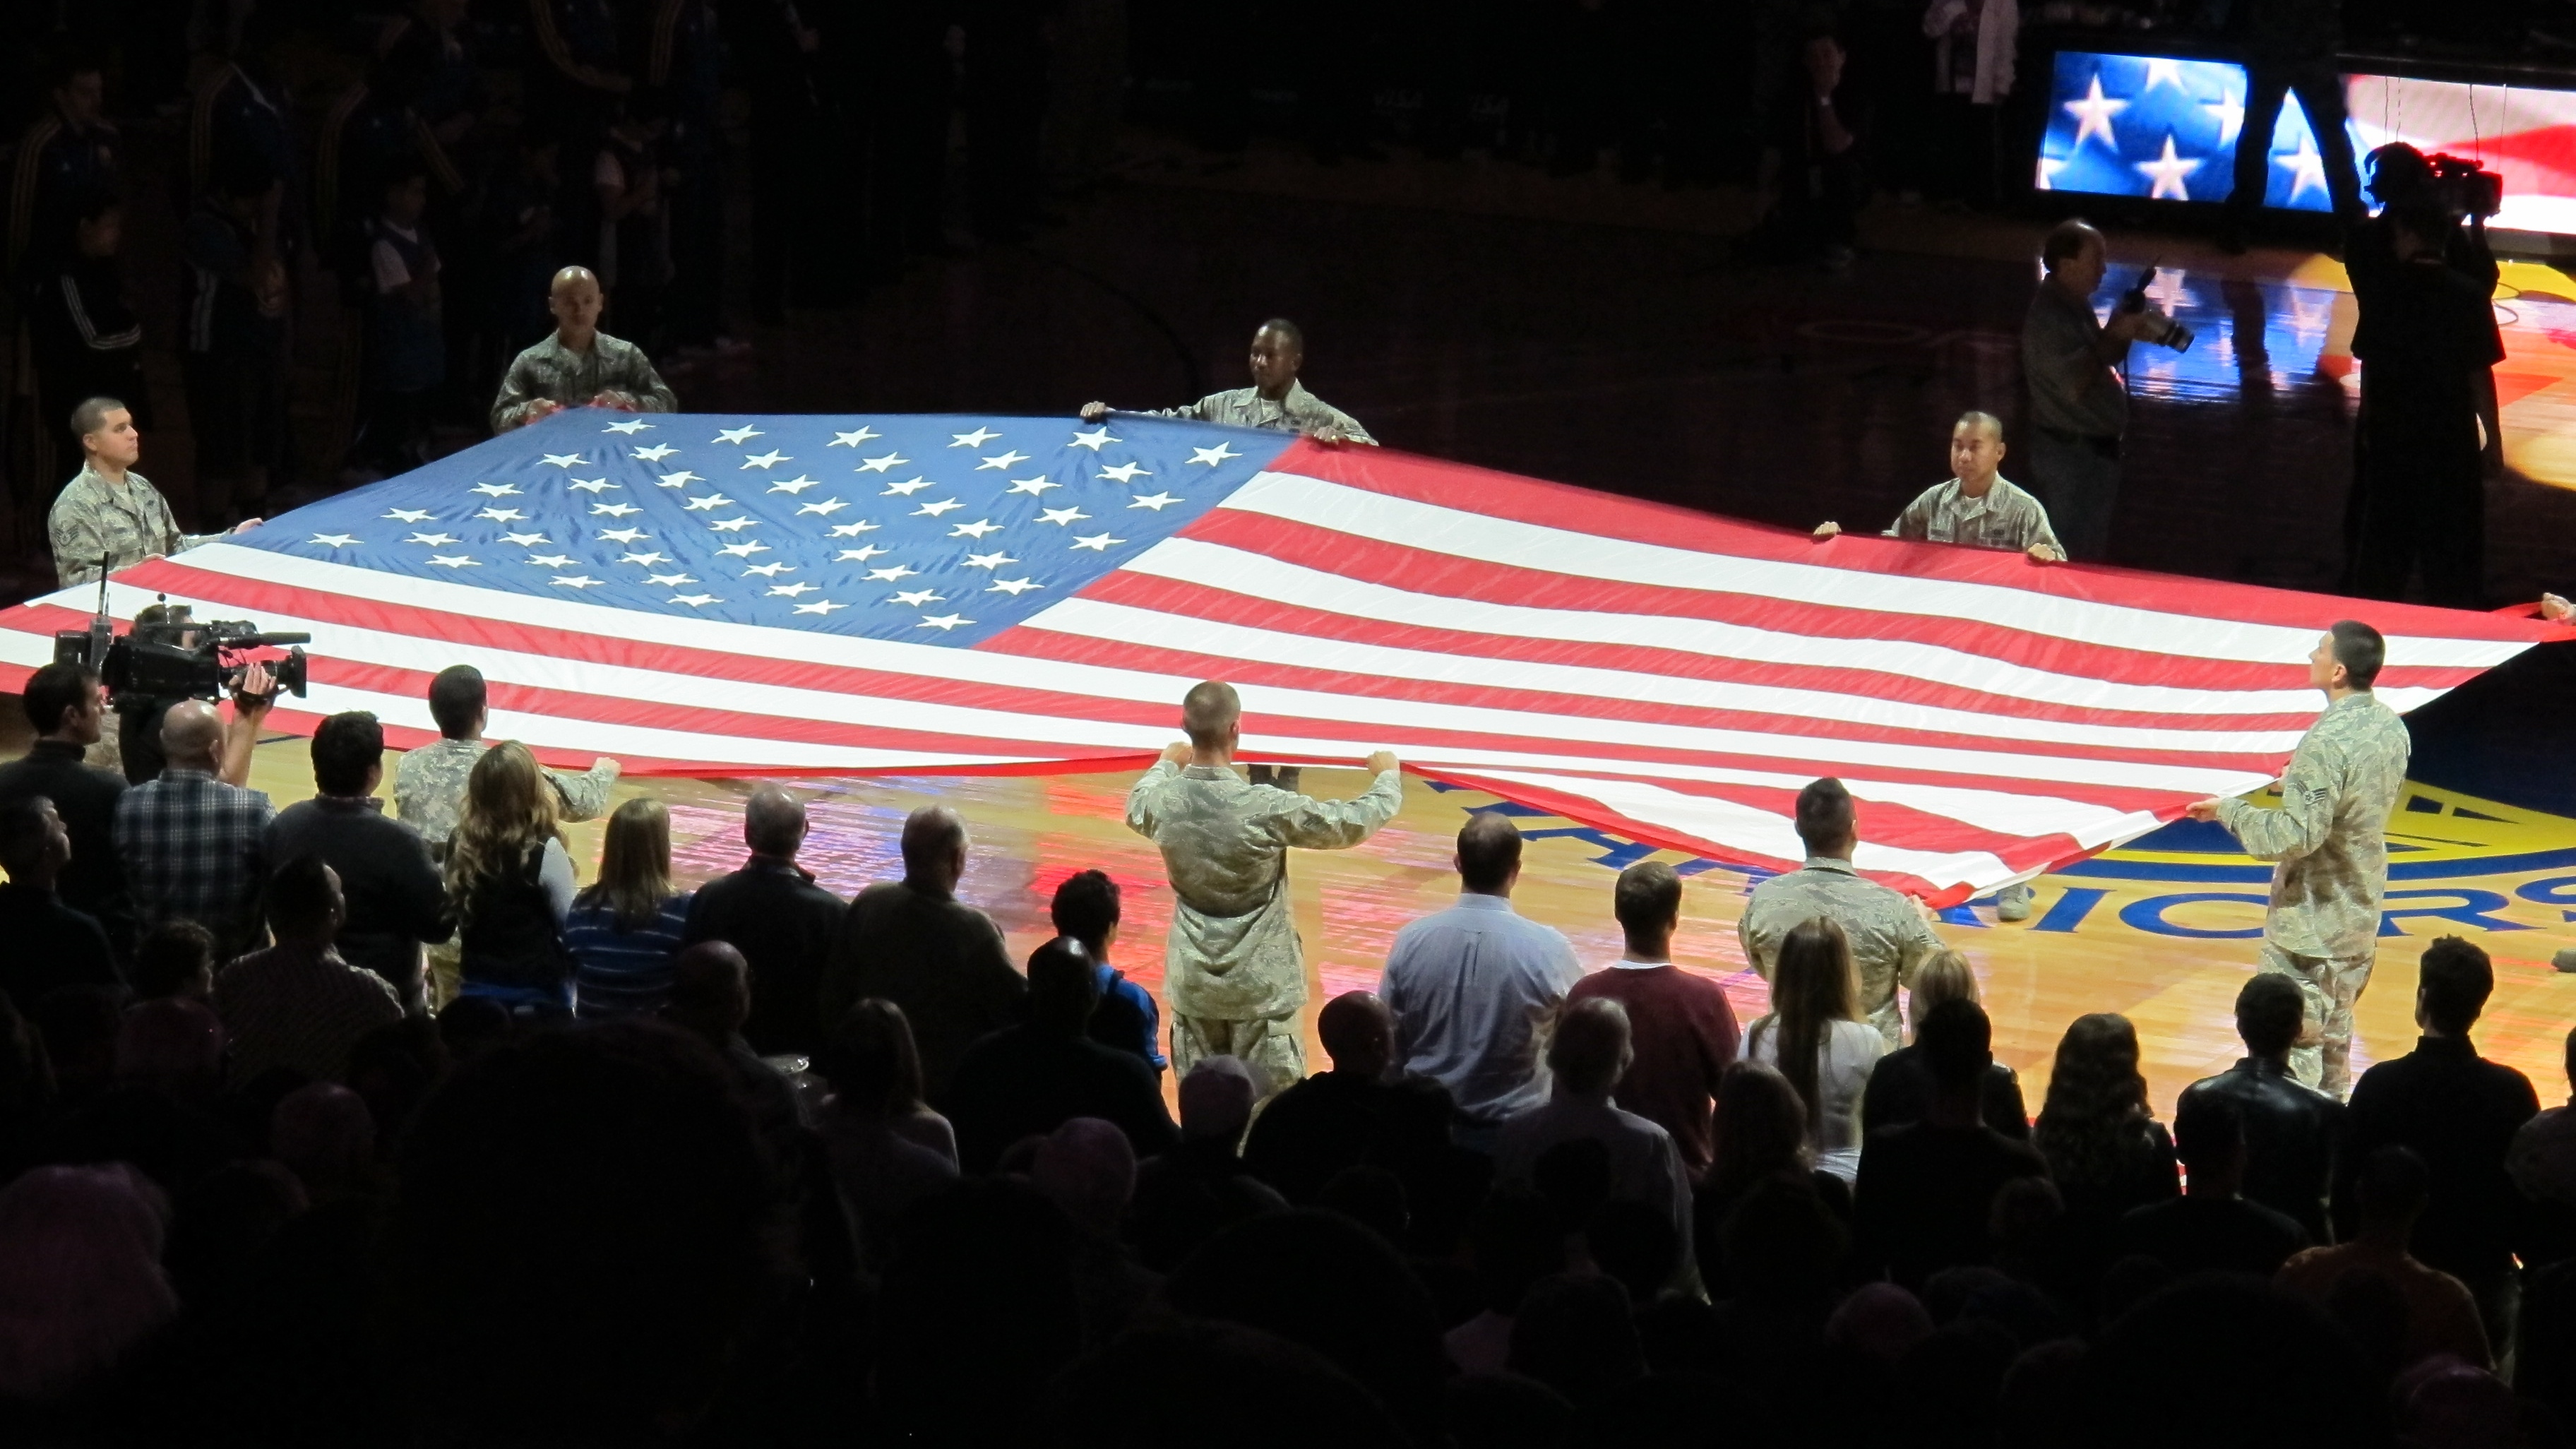 Patriotic holiday gifts: The American flag is spread at a Warriors basketball game in Oakland, CA. Photo by Barbara Newhall